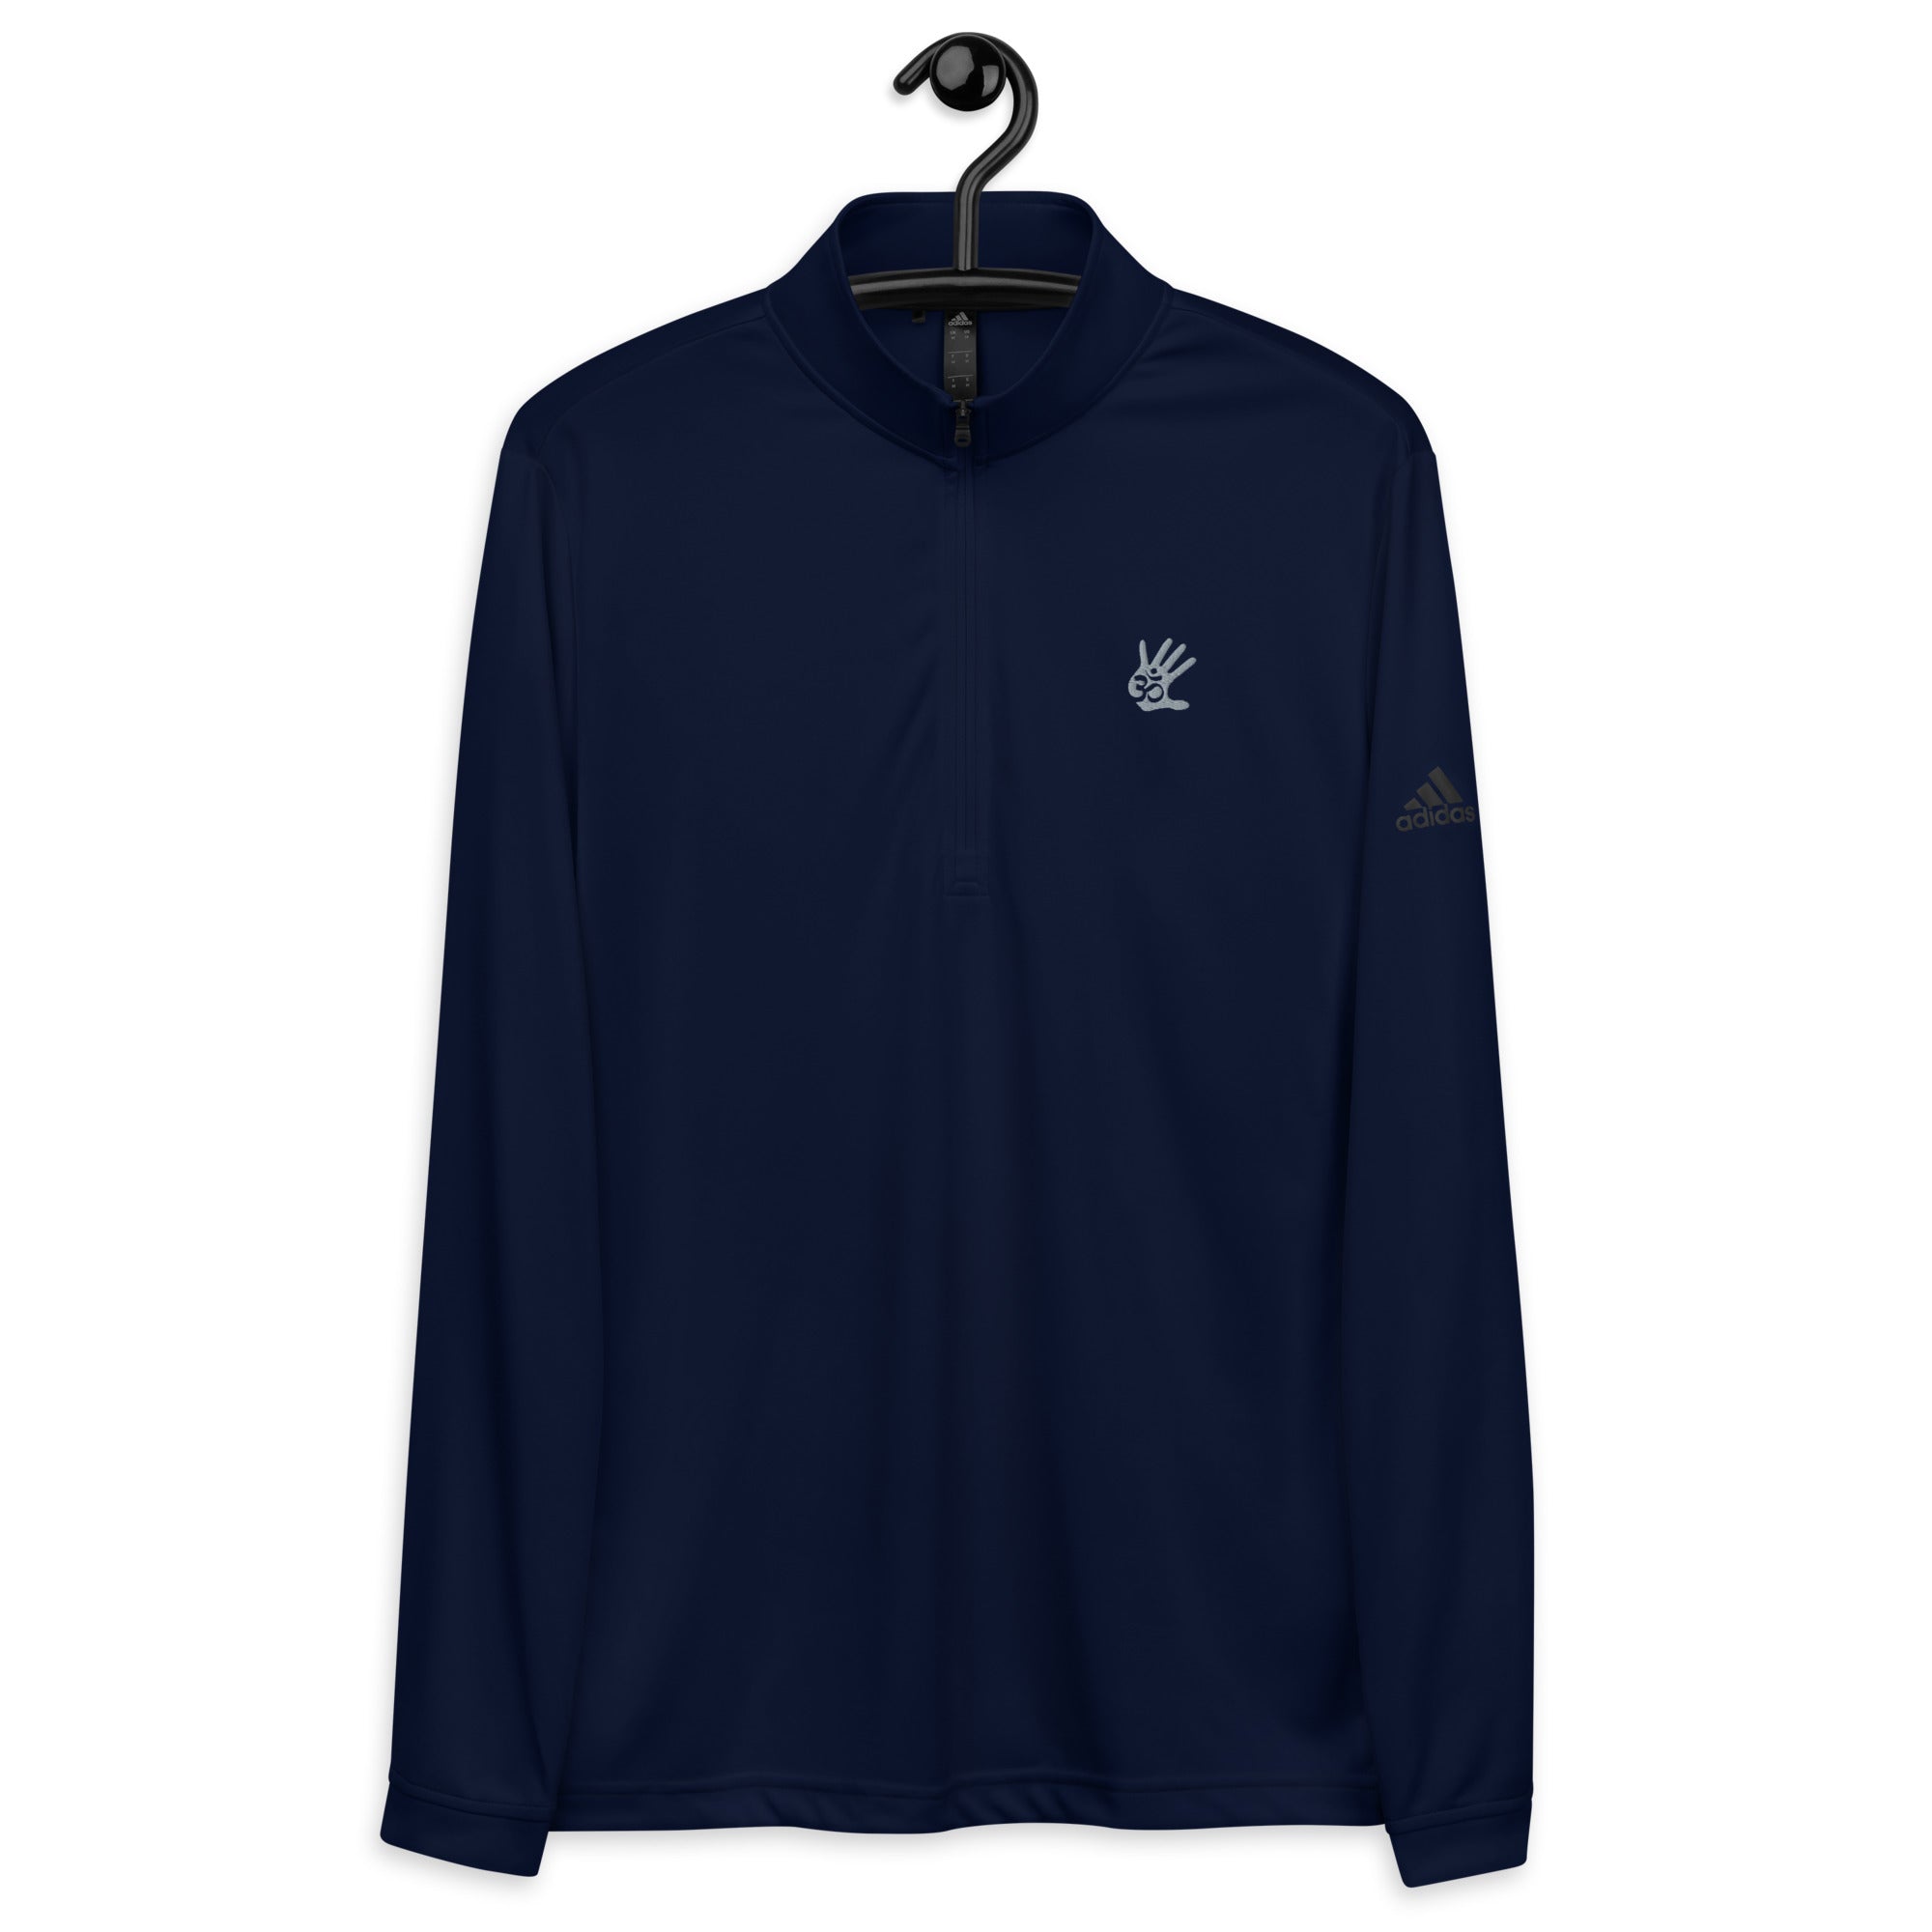 Exclusive OME5 x adidas Quarter zip pullover